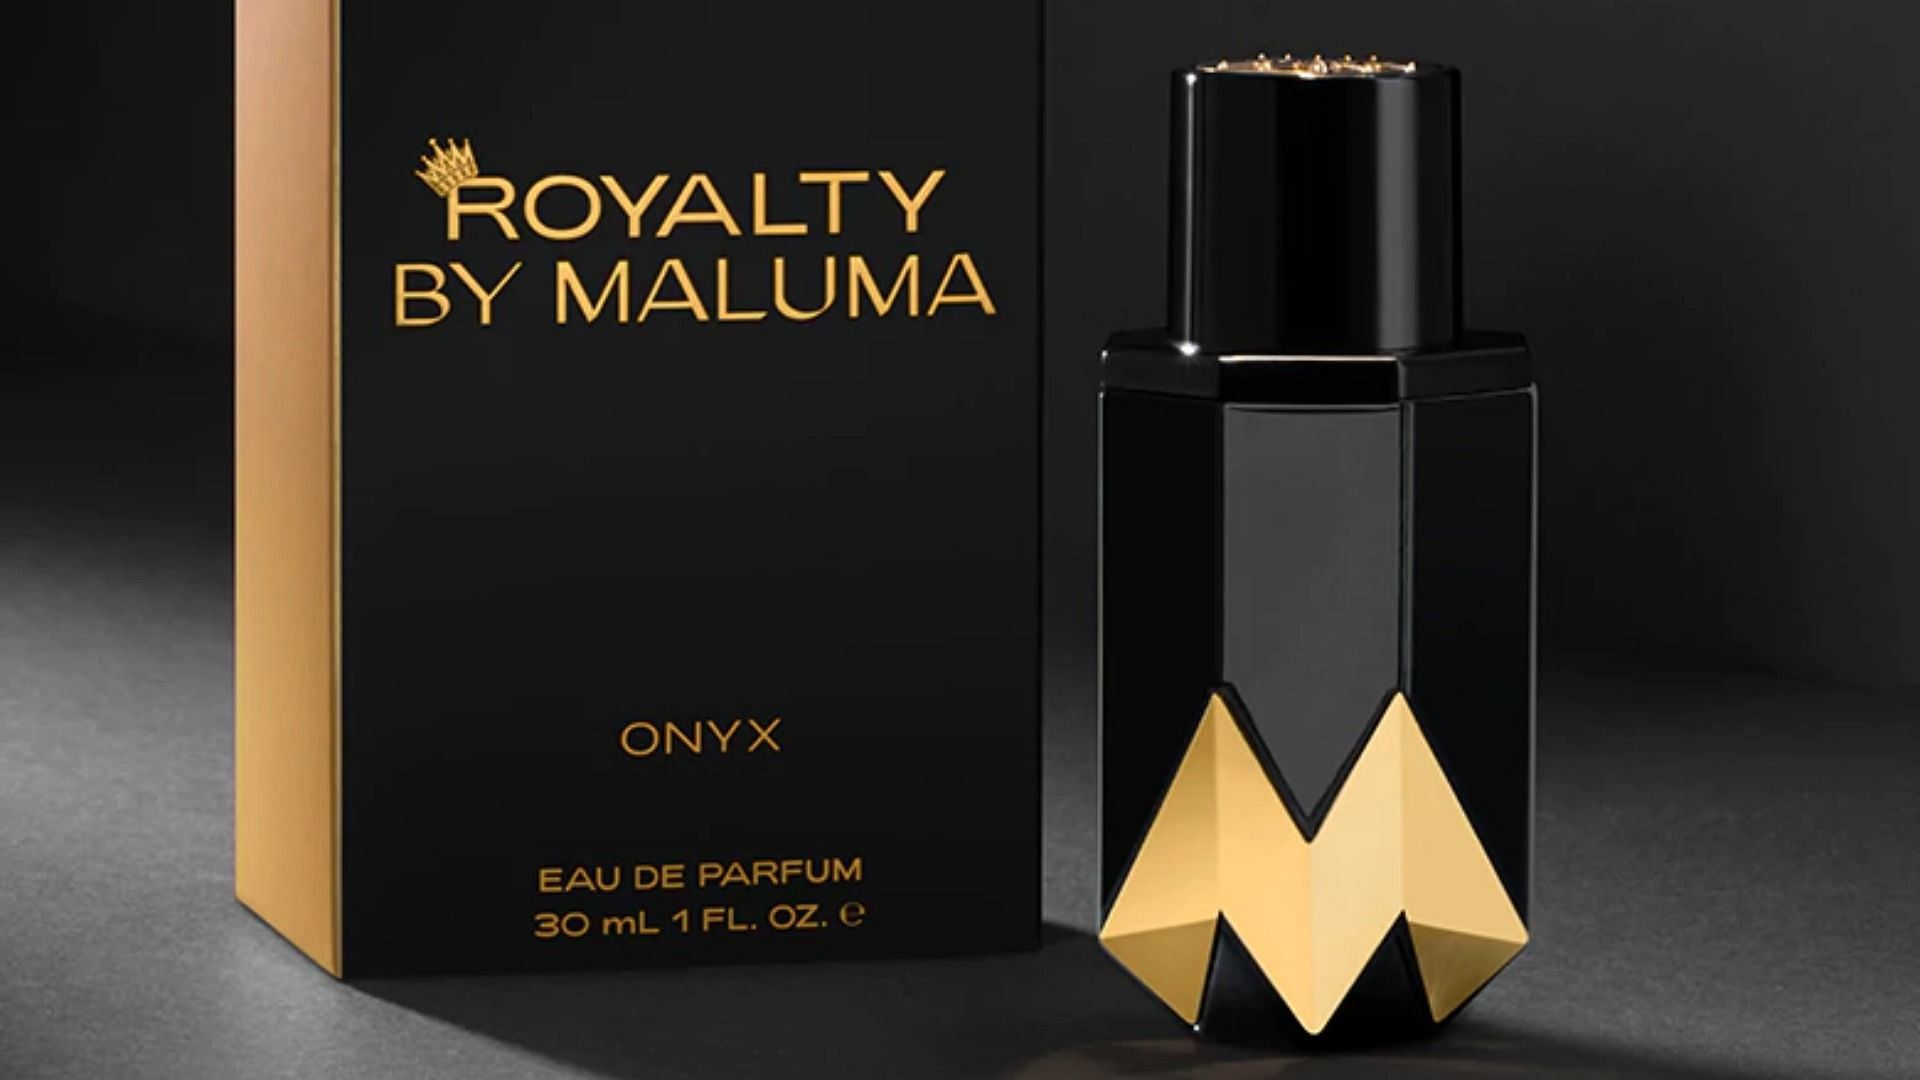 Maluma partners with Balmain to launch limited-edition line